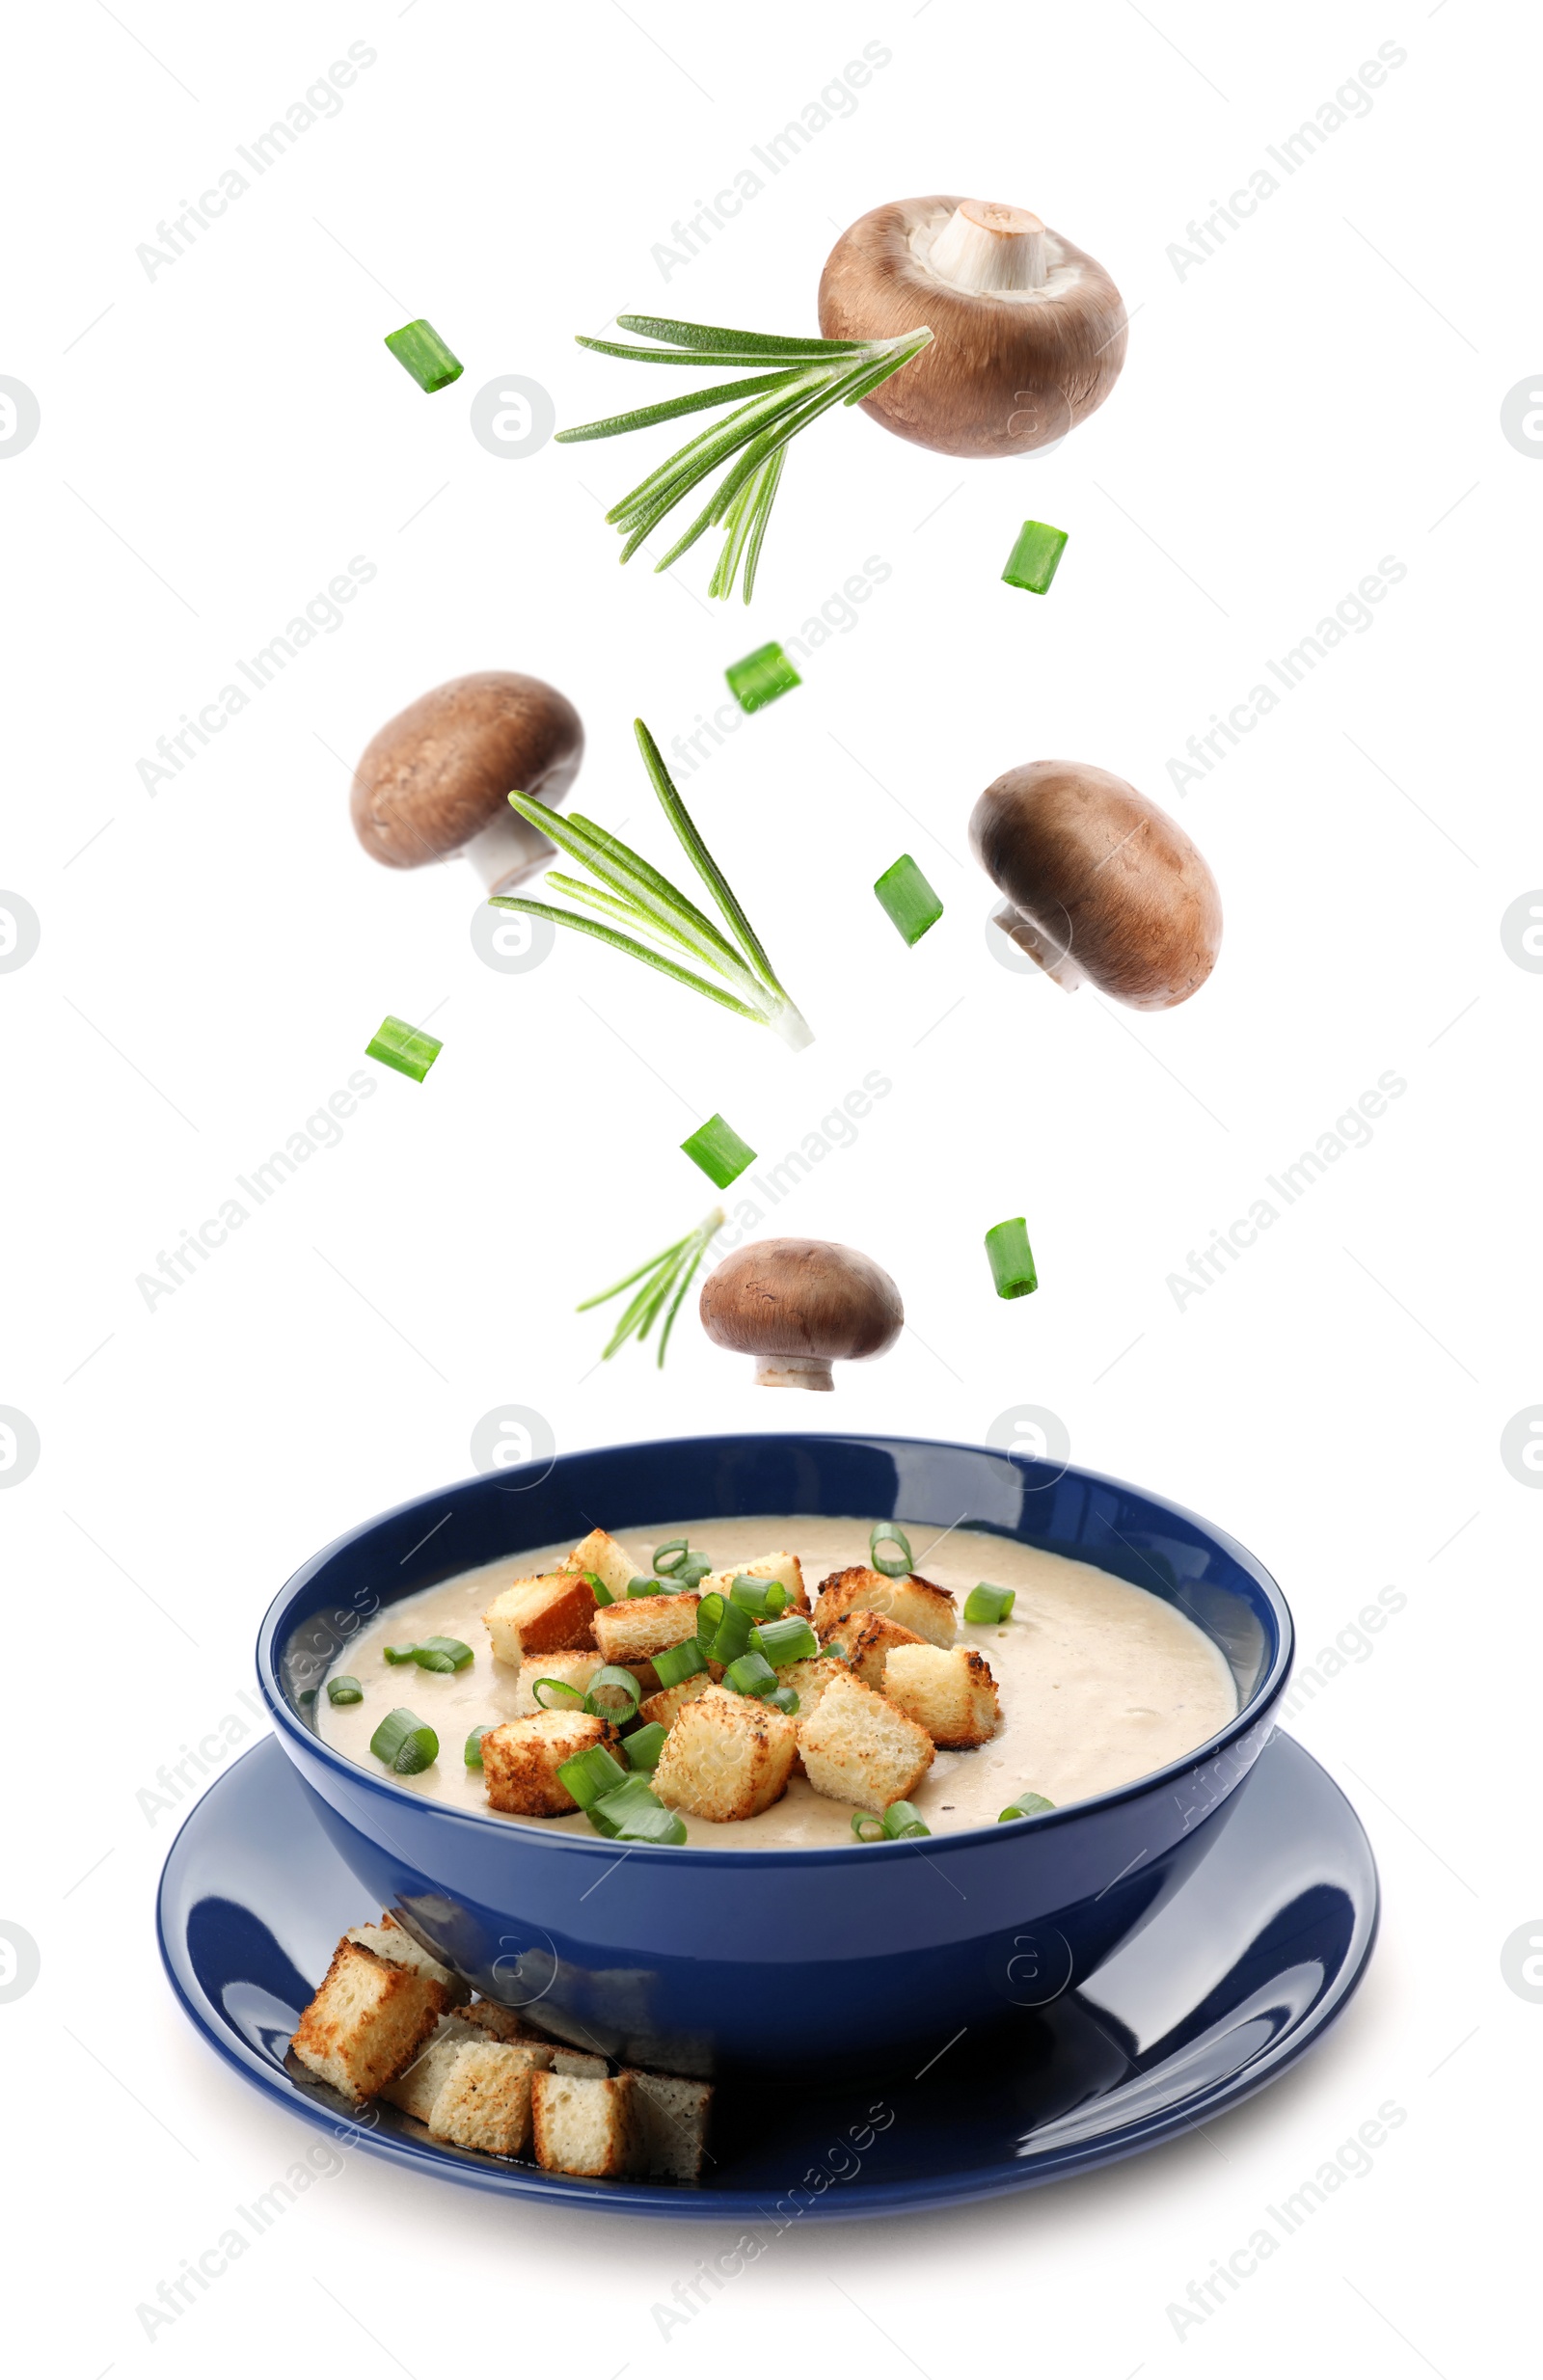 Image of Many different ingredients falling into bowl with homemade mushroom soup on white background